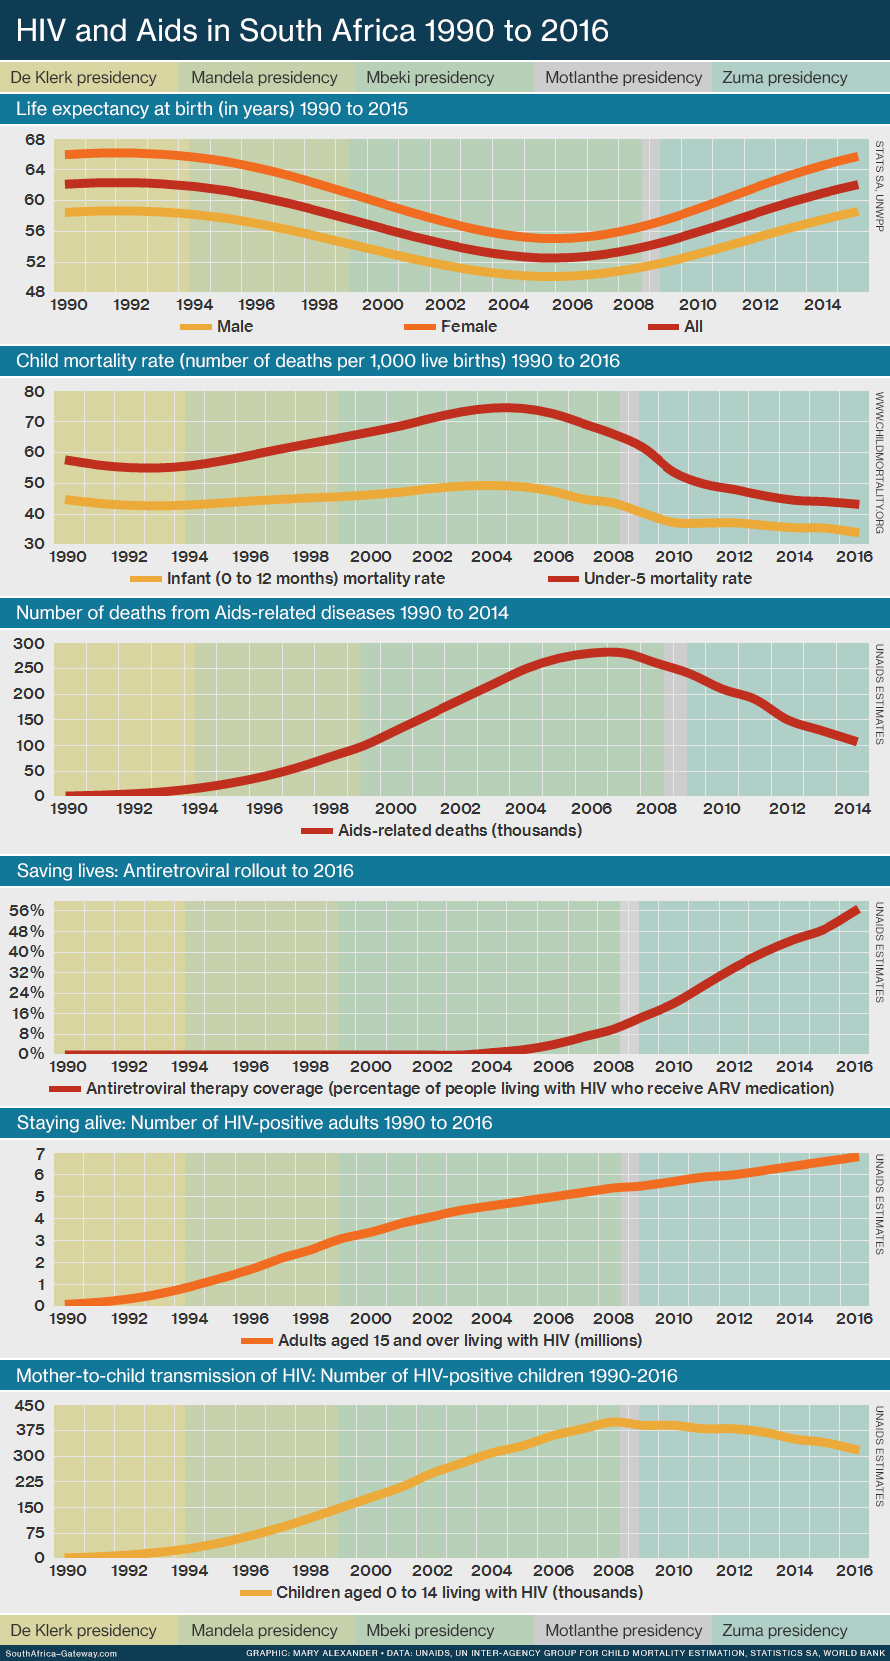 Infographic of six graphs showing trends in HIV/Aids indicators in South Africa from 1990 to 2016, during the terms of five different presidents: FW de Klerk, Nelson Mandela, Thabo Mbeki, Kgalema Motlanthe and Jacob Zuma. The six indicators are life expectancy, child mortality, HIV-positive population, children living with HIV, Aids-related deaths and antiretroviral therapy coverage of the HIV-positive population.